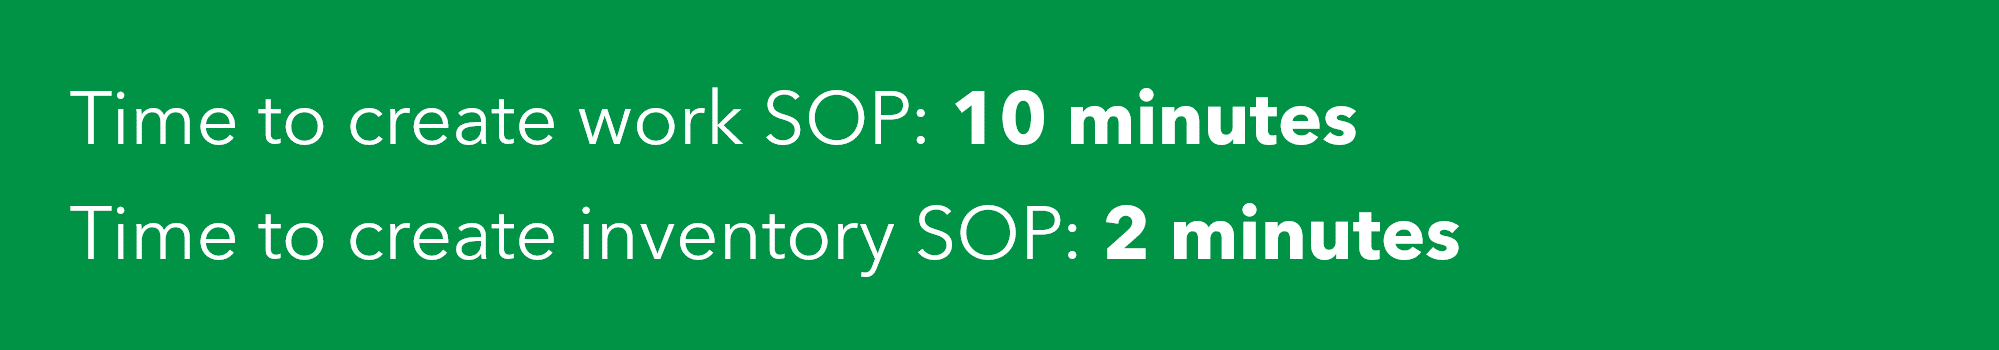 Standard operating procedure time investment: Time to create work SOP: 10 minutes. Time to create inventory SOP: 2 minutes